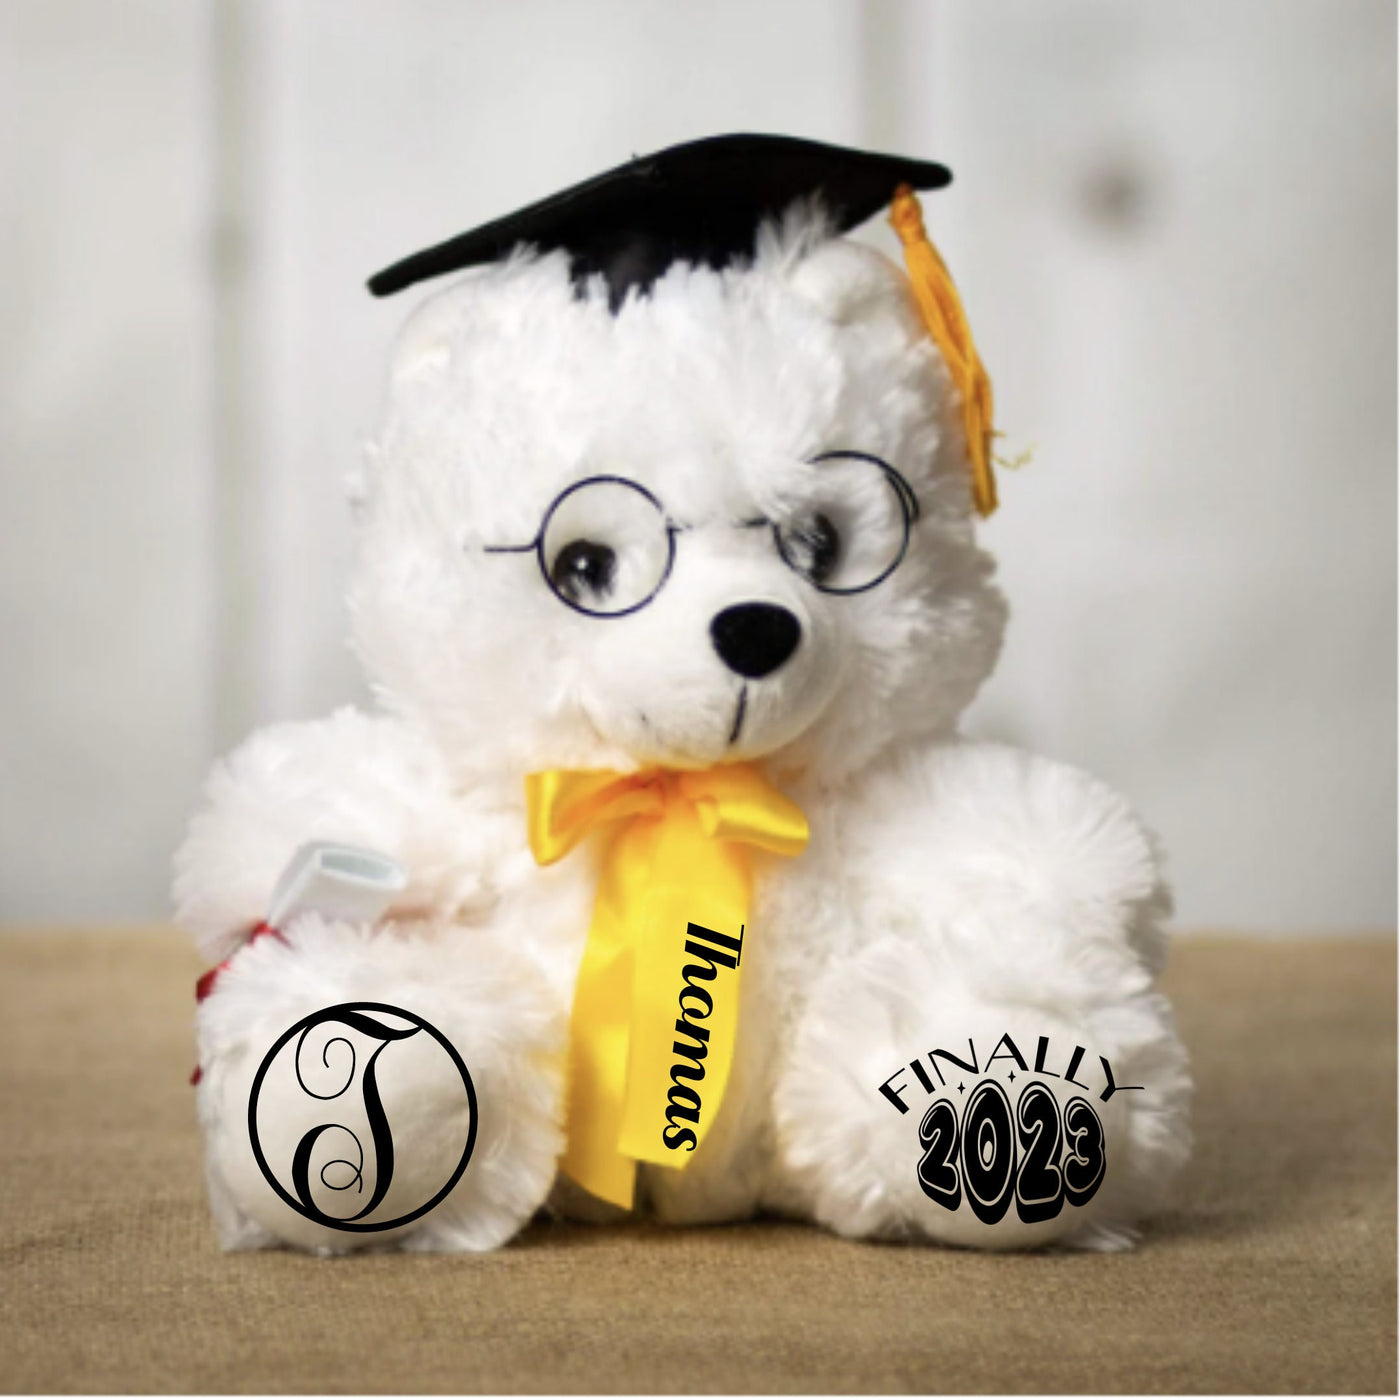 Personalized Graduation Bear for 2023 Graduation Student Graduation Gift for her or him